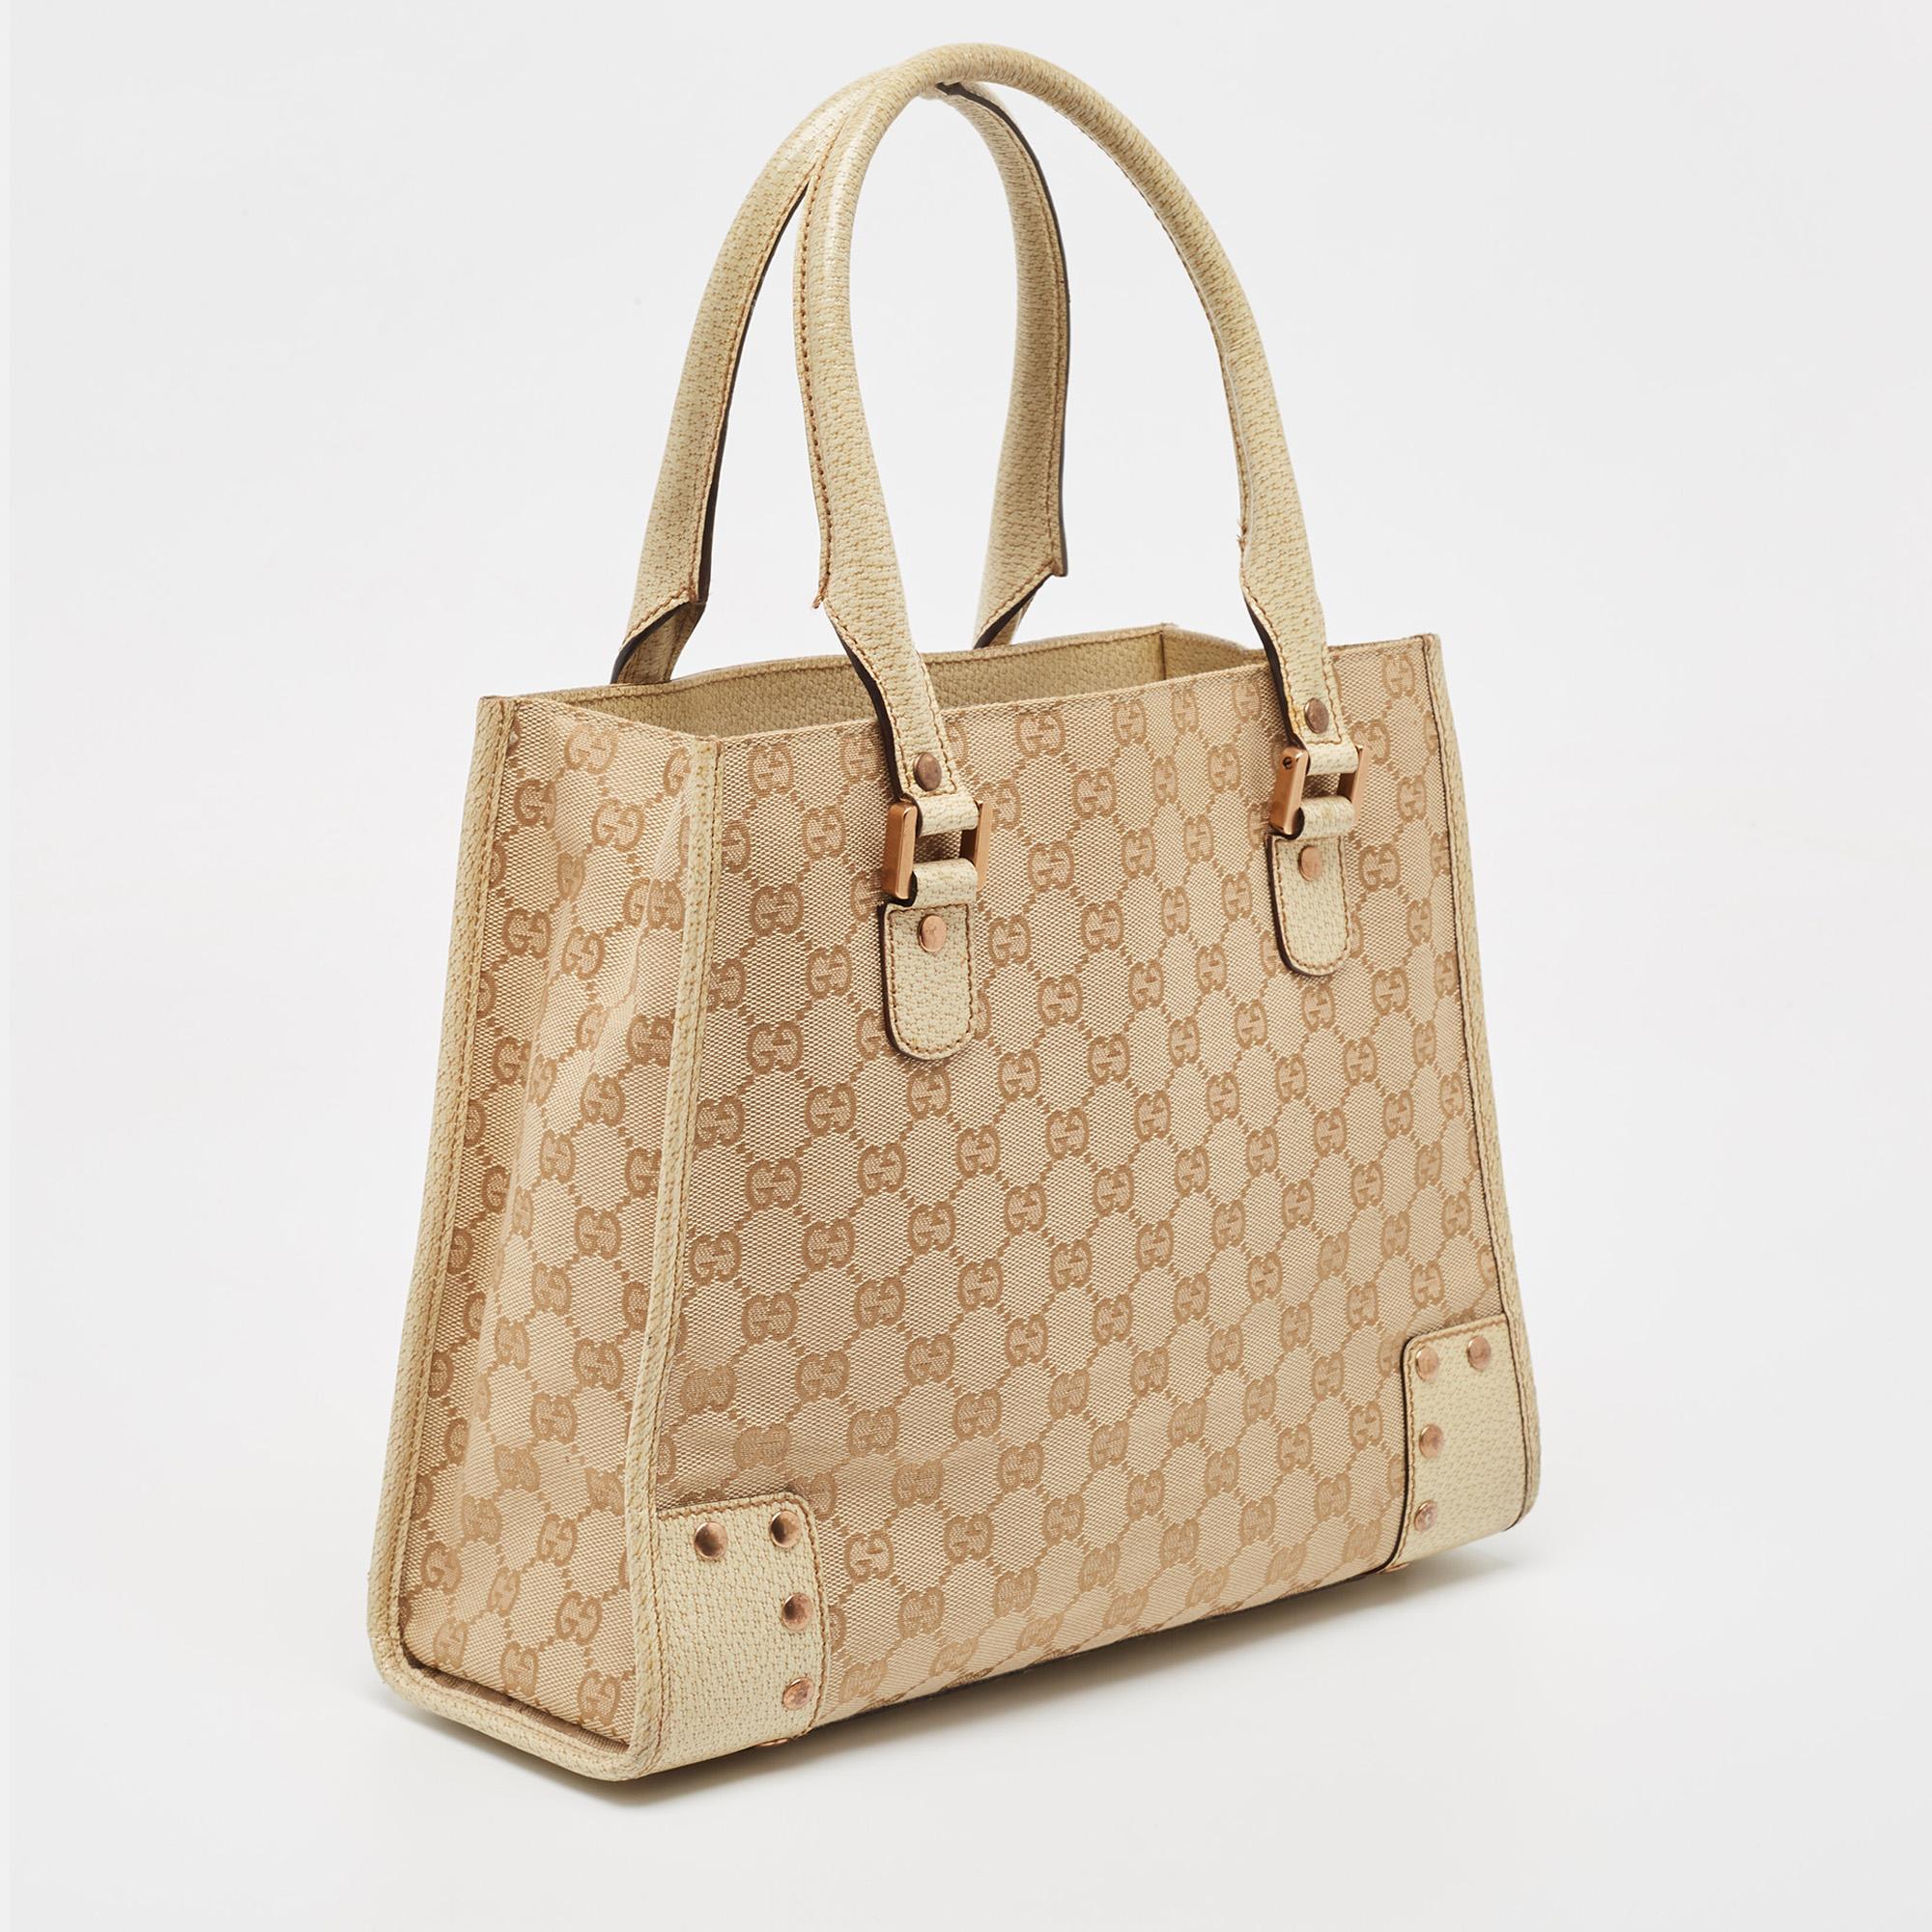 Women's Gucci Beige/Cream GG Canvas and Leather Studded Tote